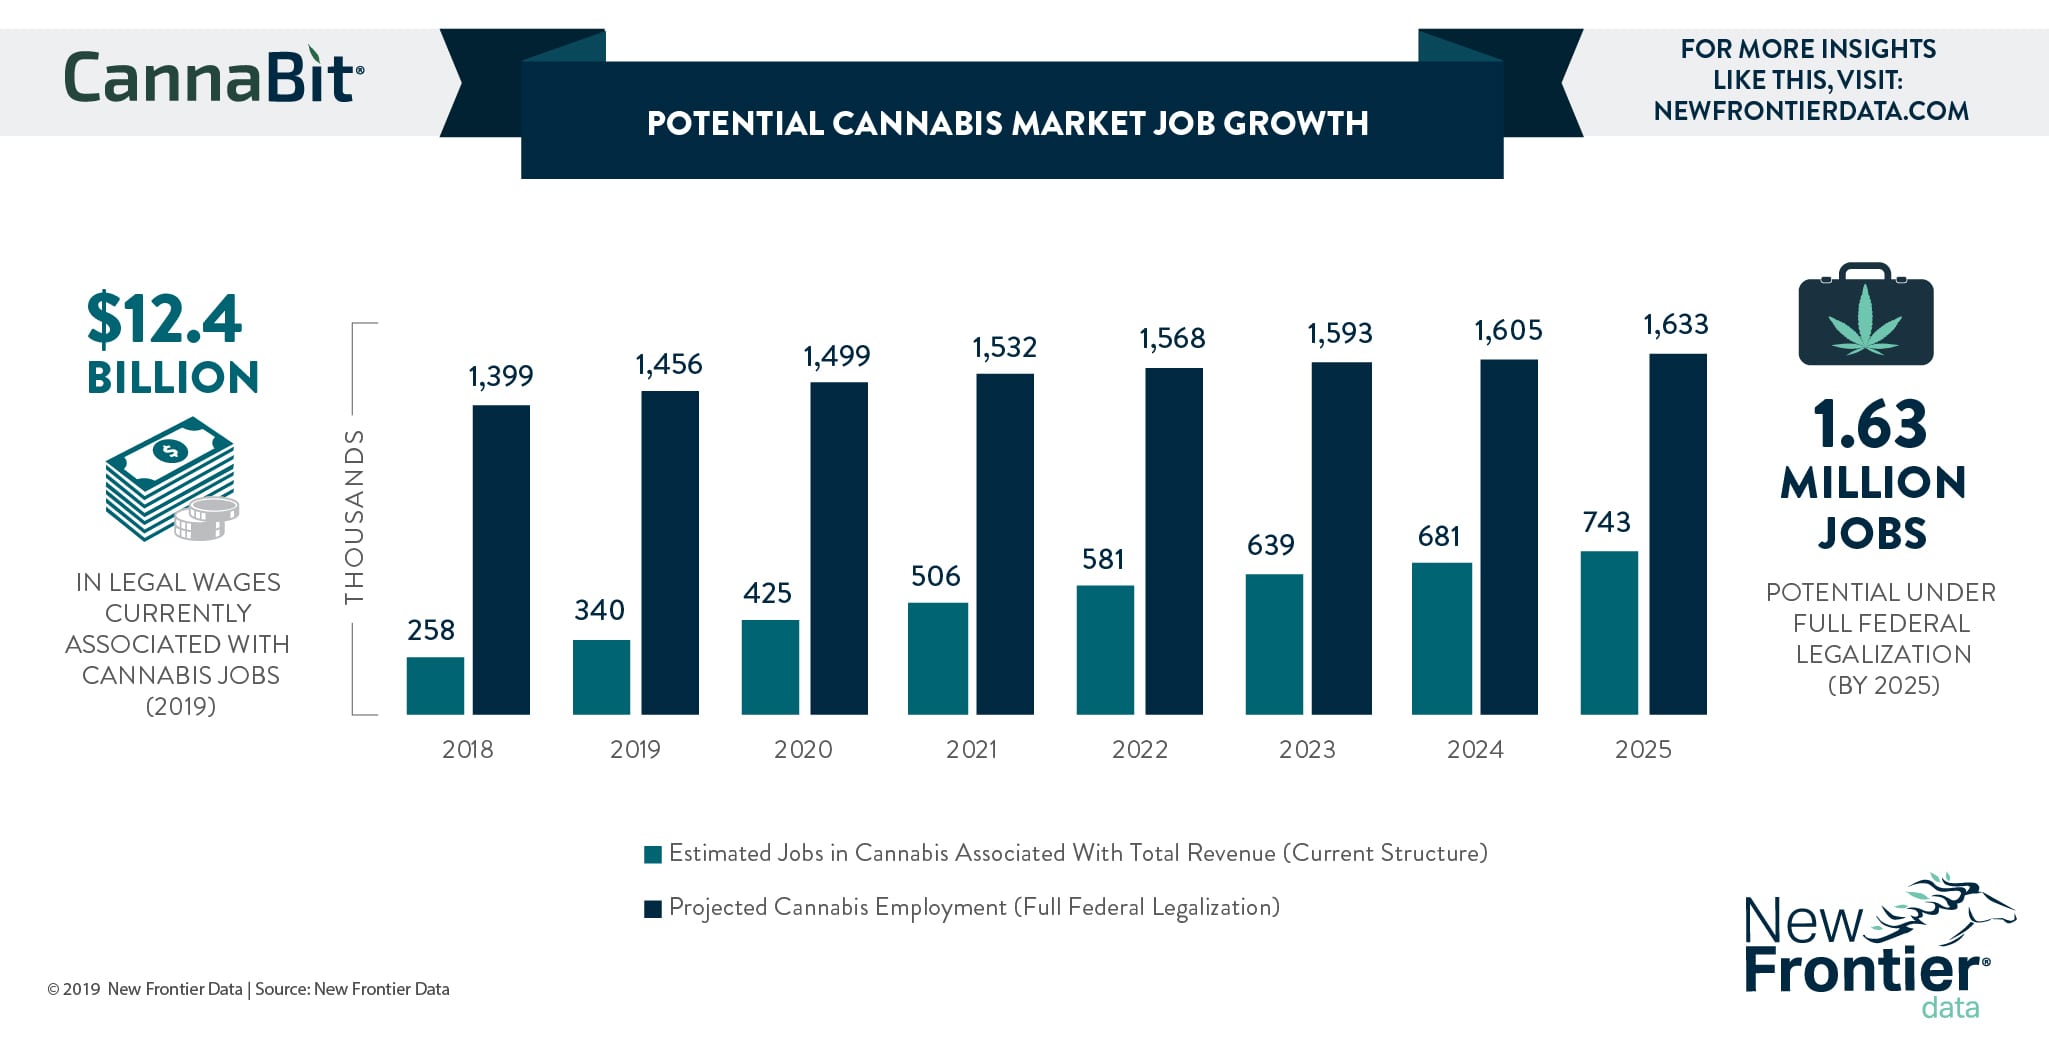 Potential Cannabis Market Job Growth New Frontier Data